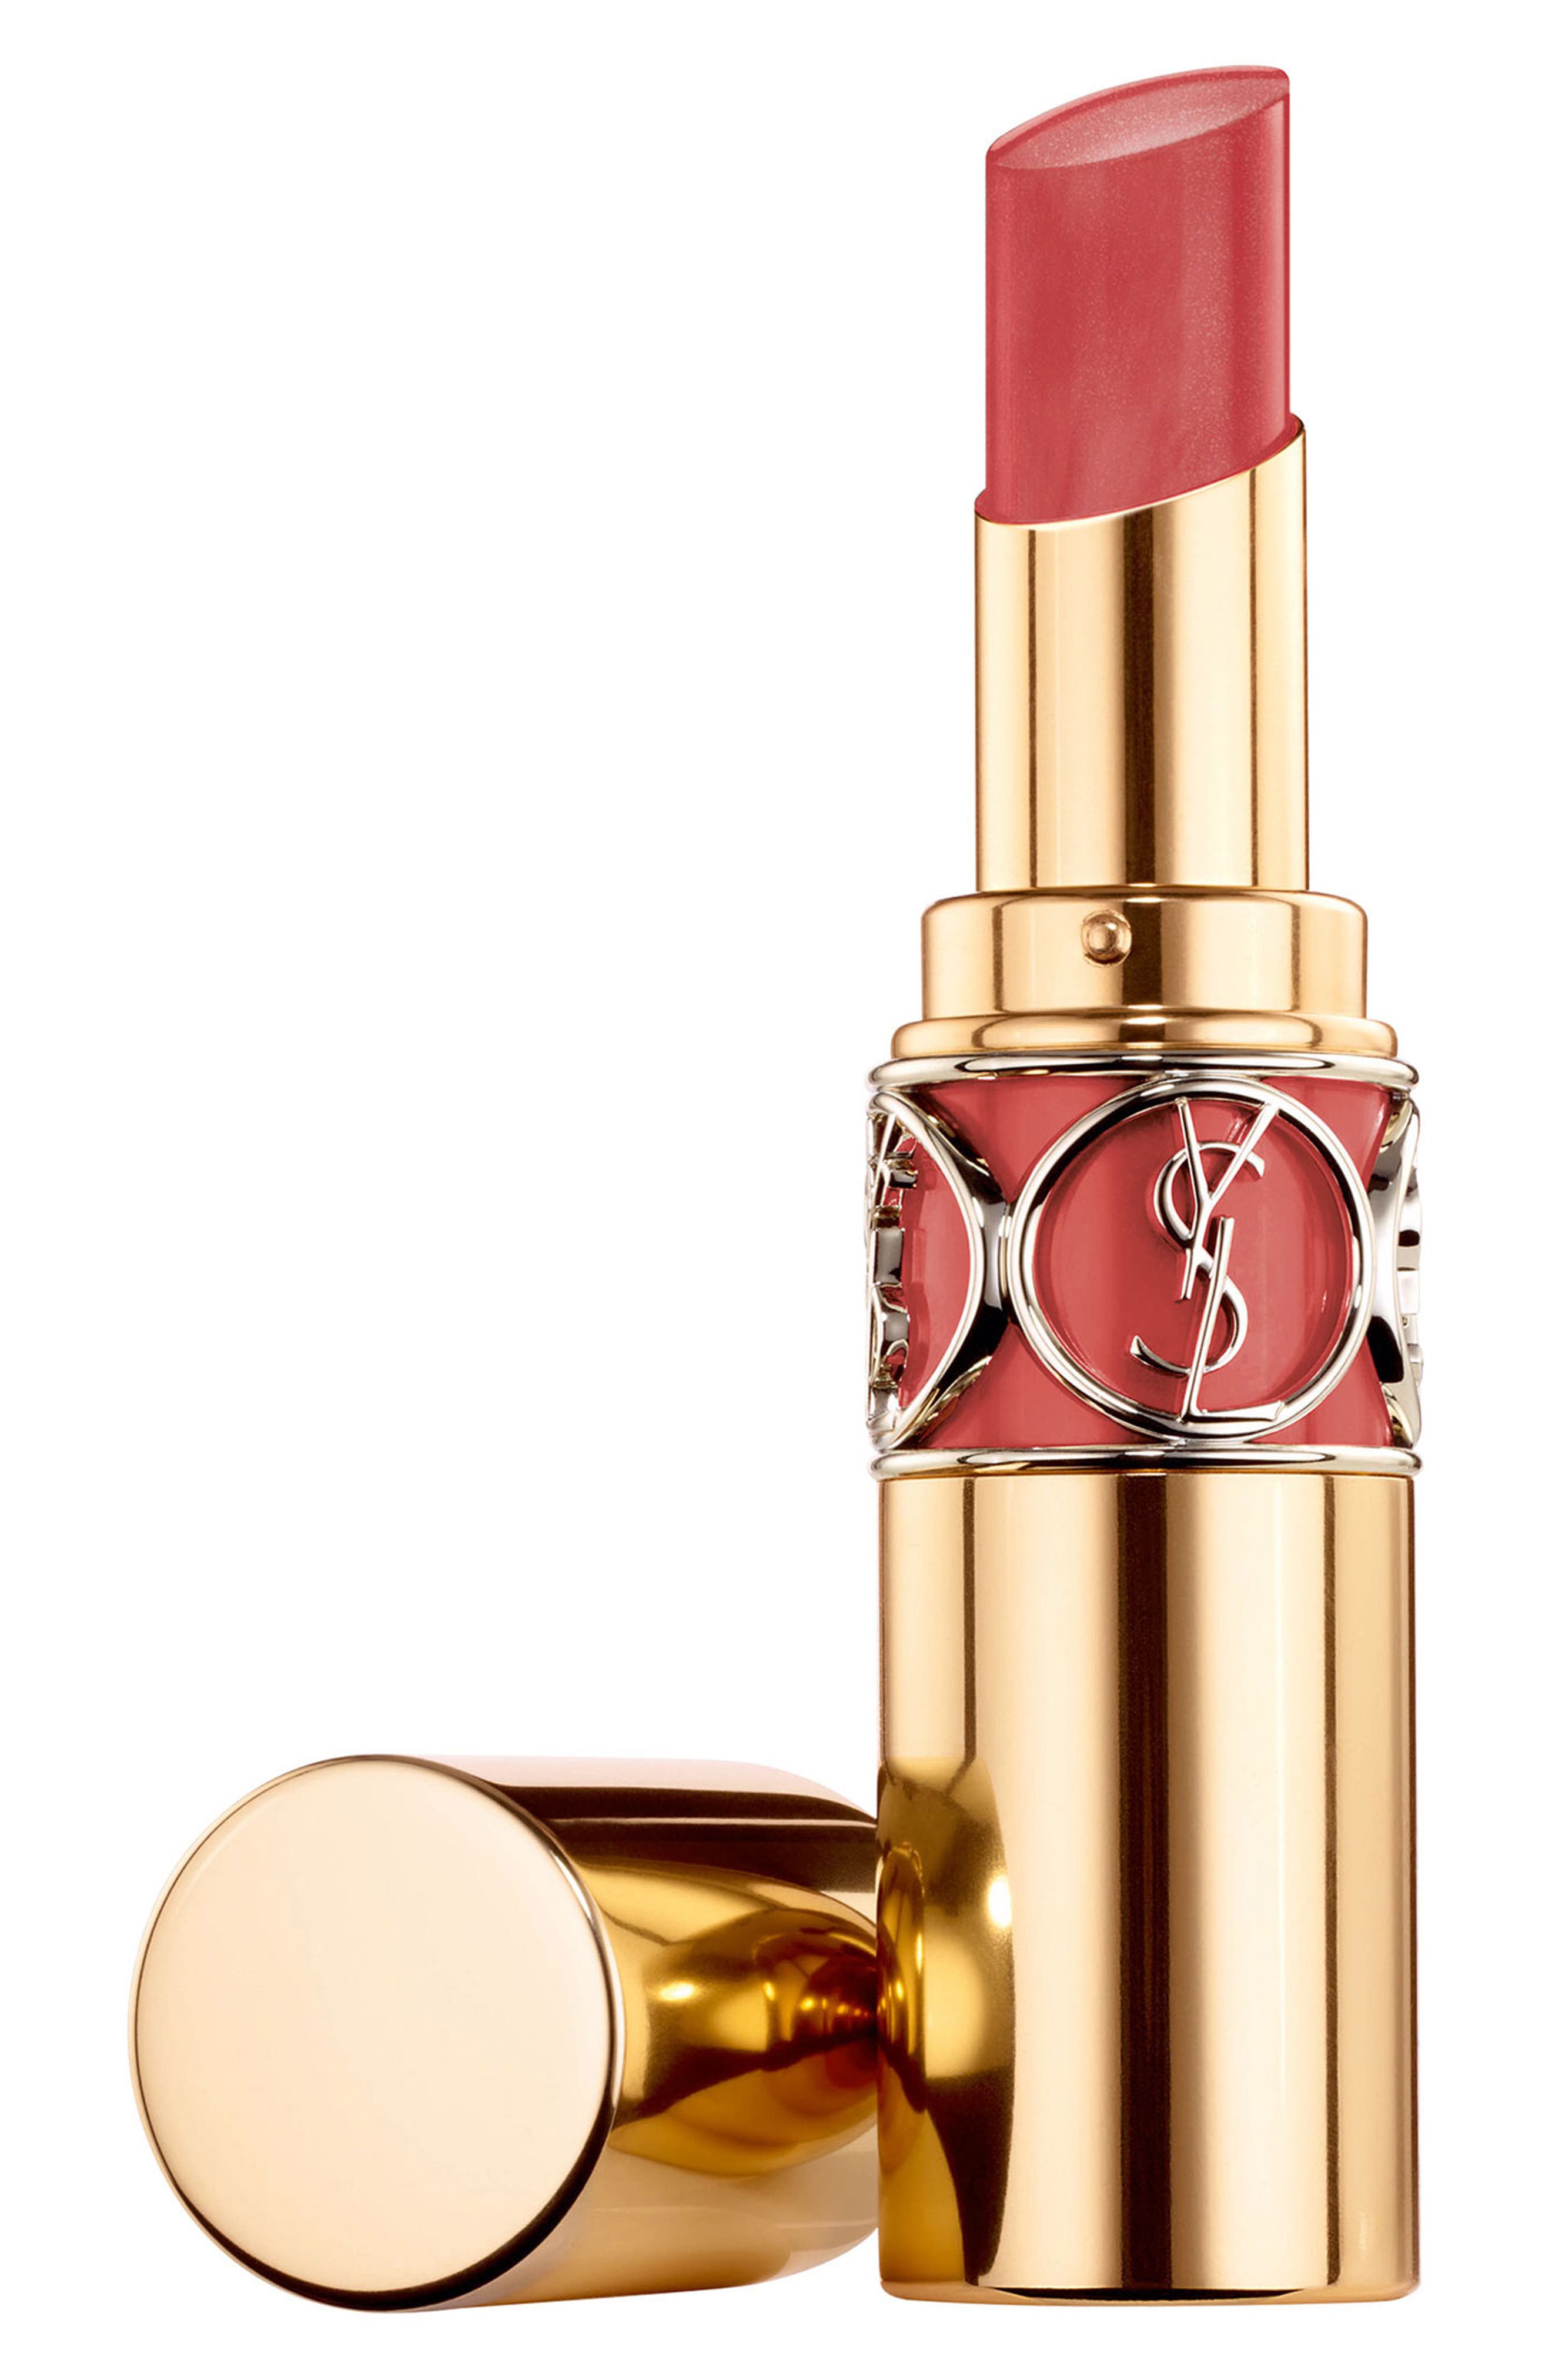 Yves Saint Laurent Rouge Volupte Shine Oil-in-Stick Lipstick Balm in Burnt Suede at Nordstrom